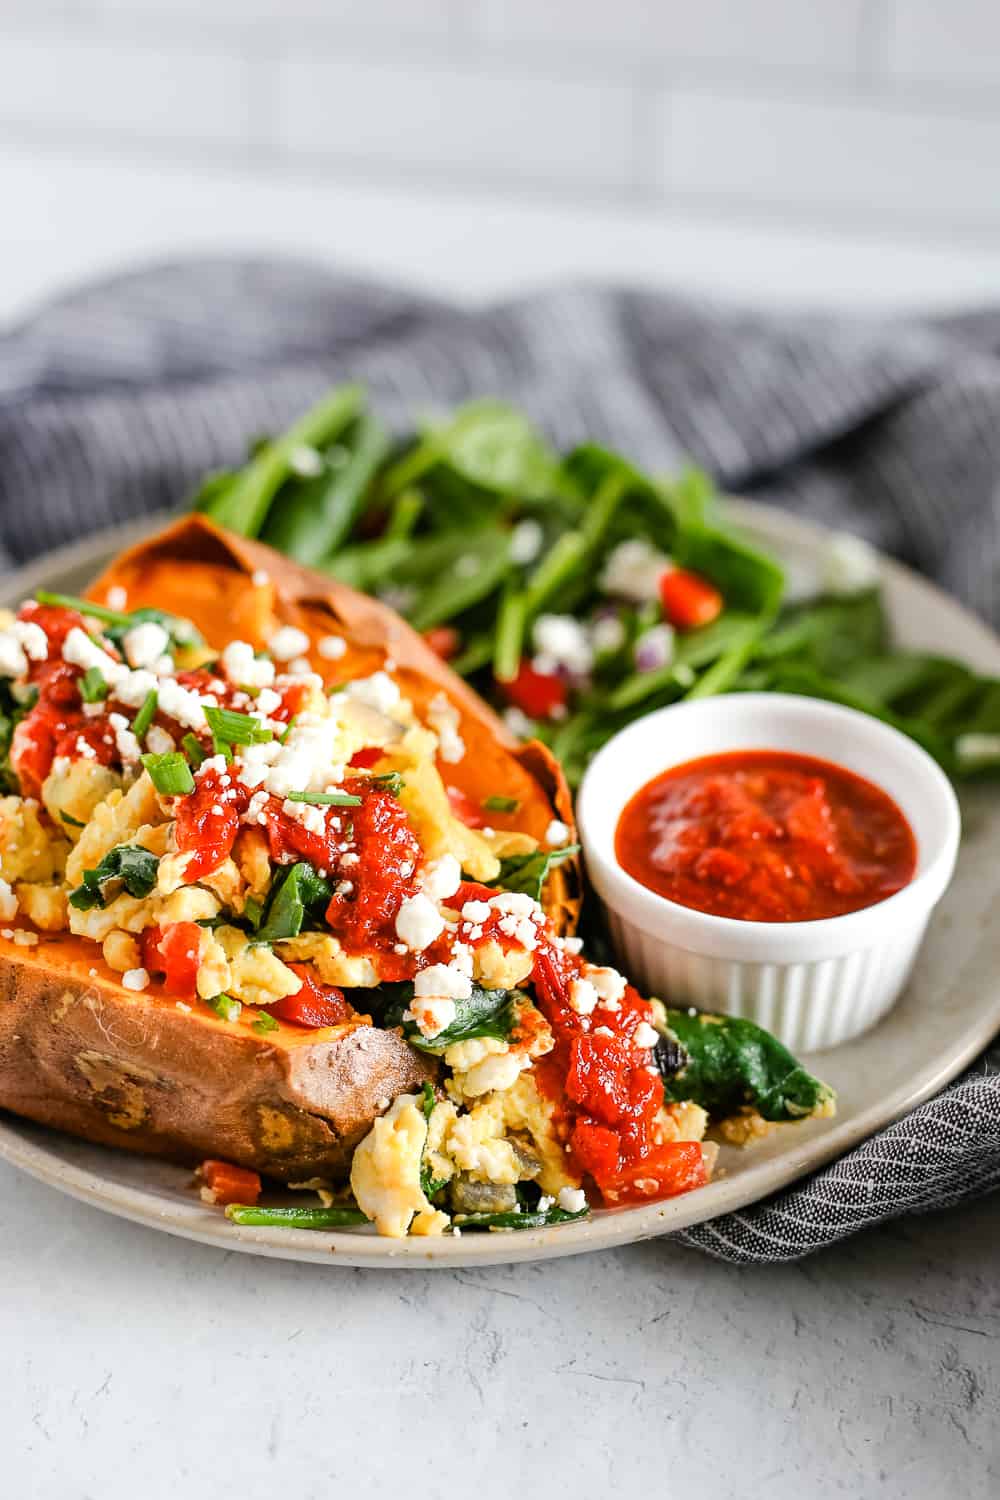 A plate with a breakfast stuffed sweet potato, topped with scrambled eggs and veggies, served with a side salad